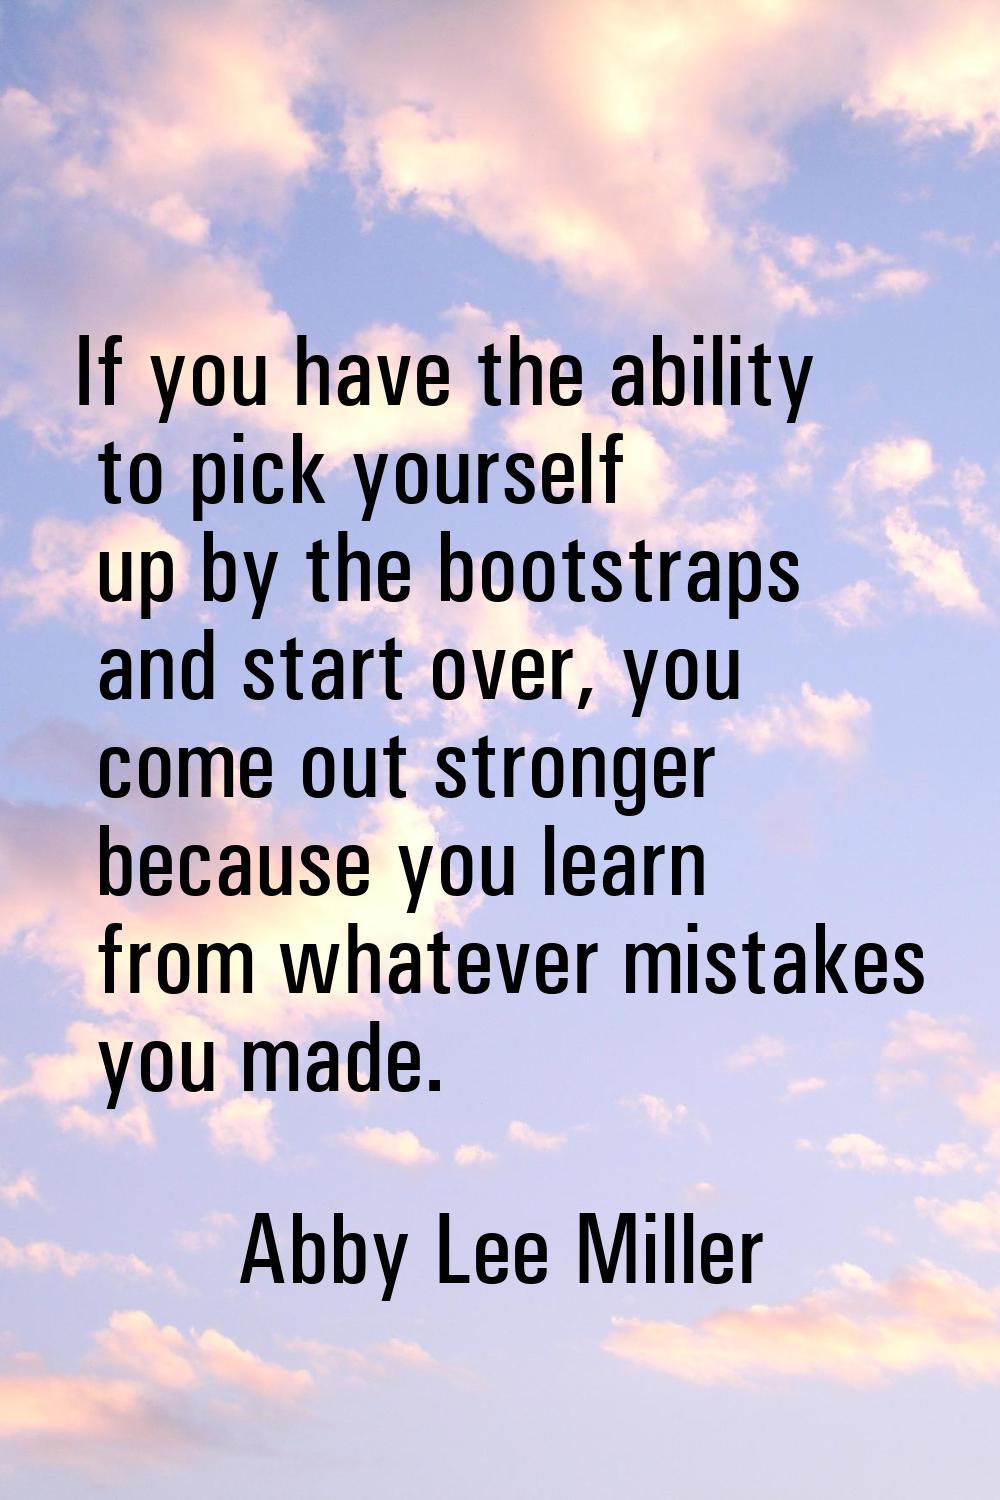 If you have the ability to pick yourself up by the bootstraps and start over, you come out stronger